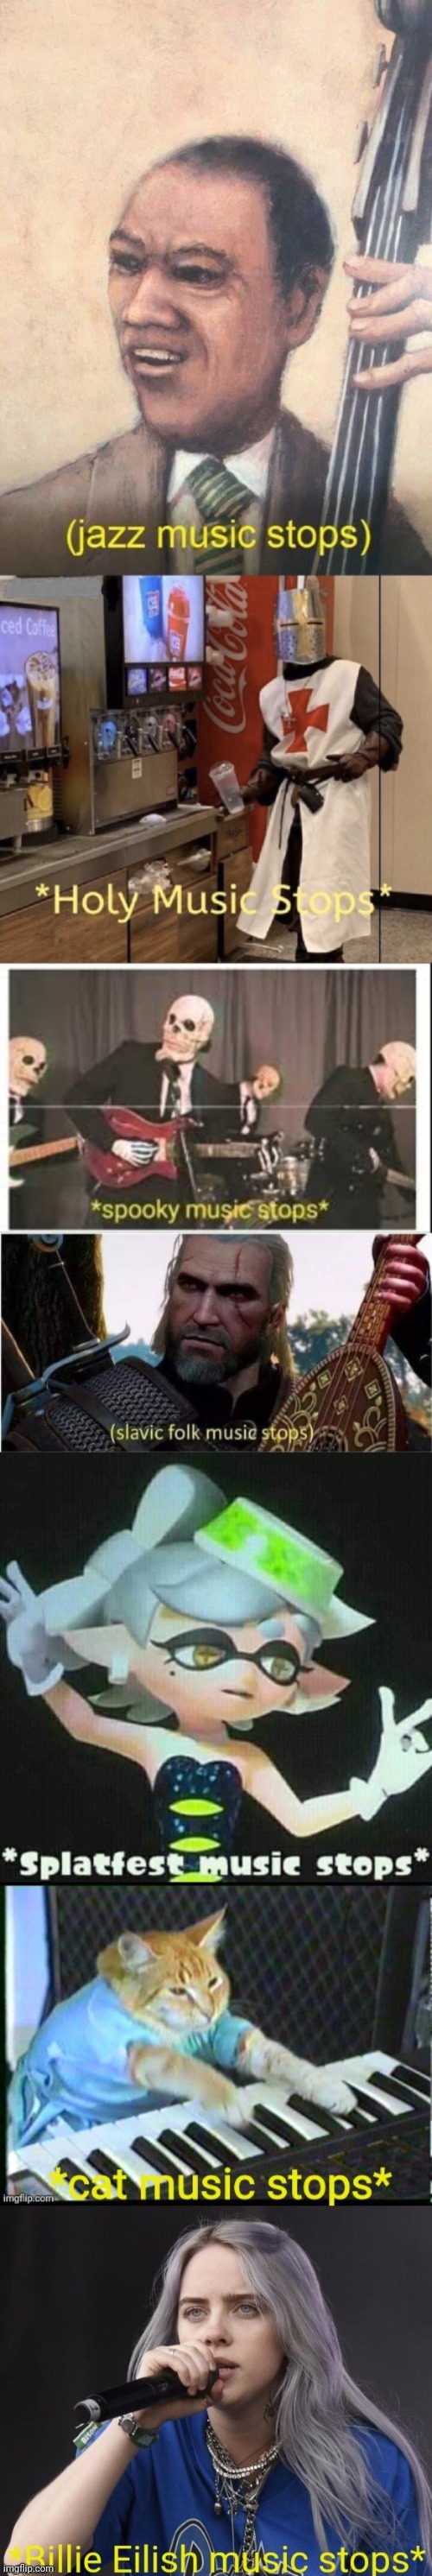 *alot of music stops* | image tagged in alot of music stops | made w/ Imgflip meme maker